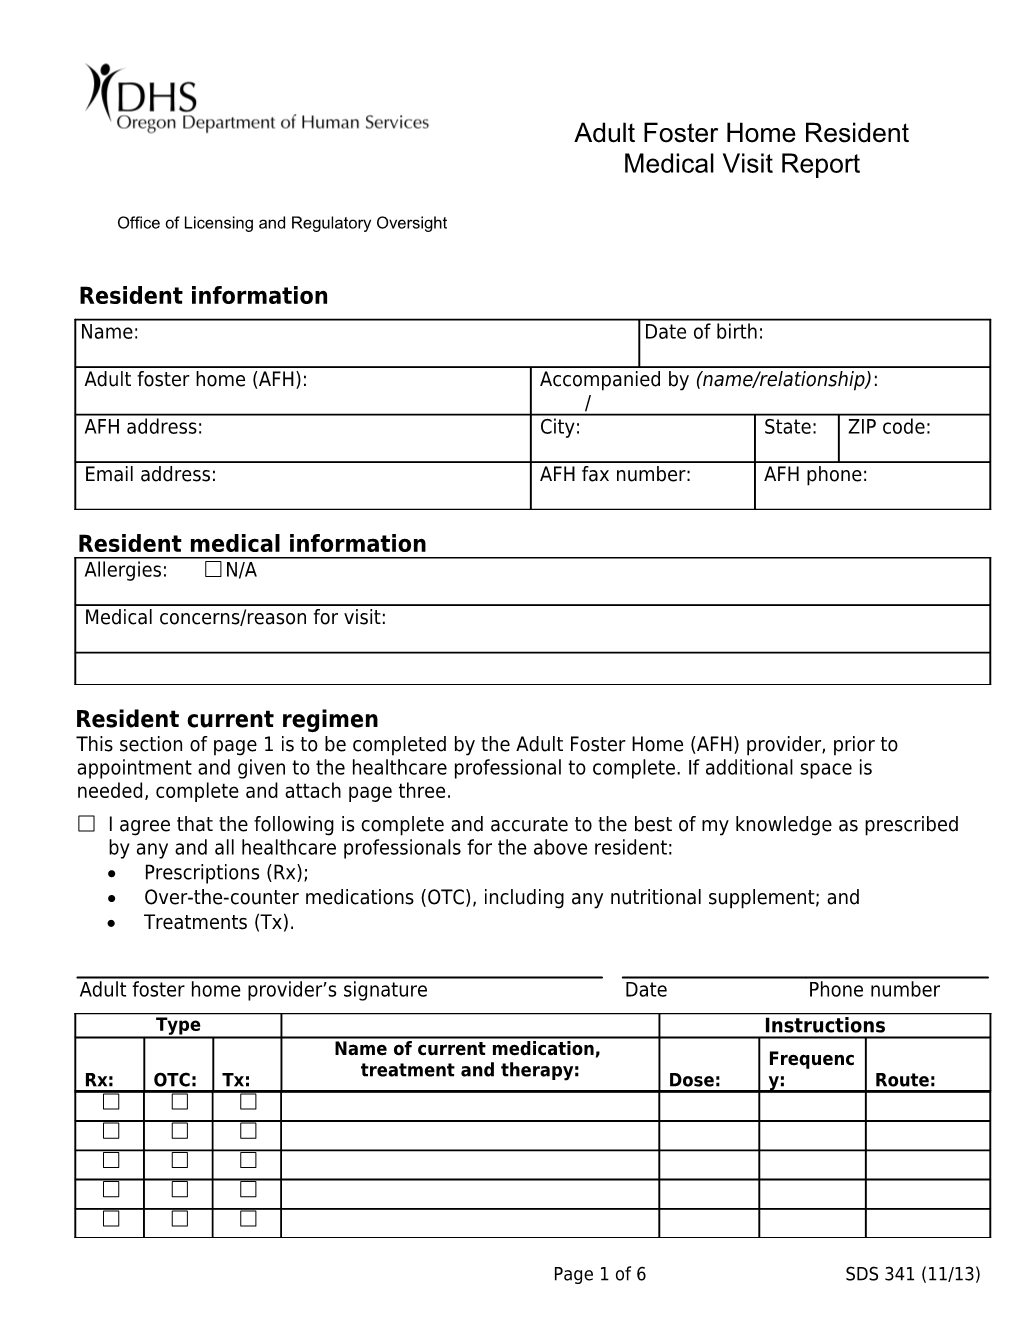 Adult Foster Home Resident - Medical Visit Report